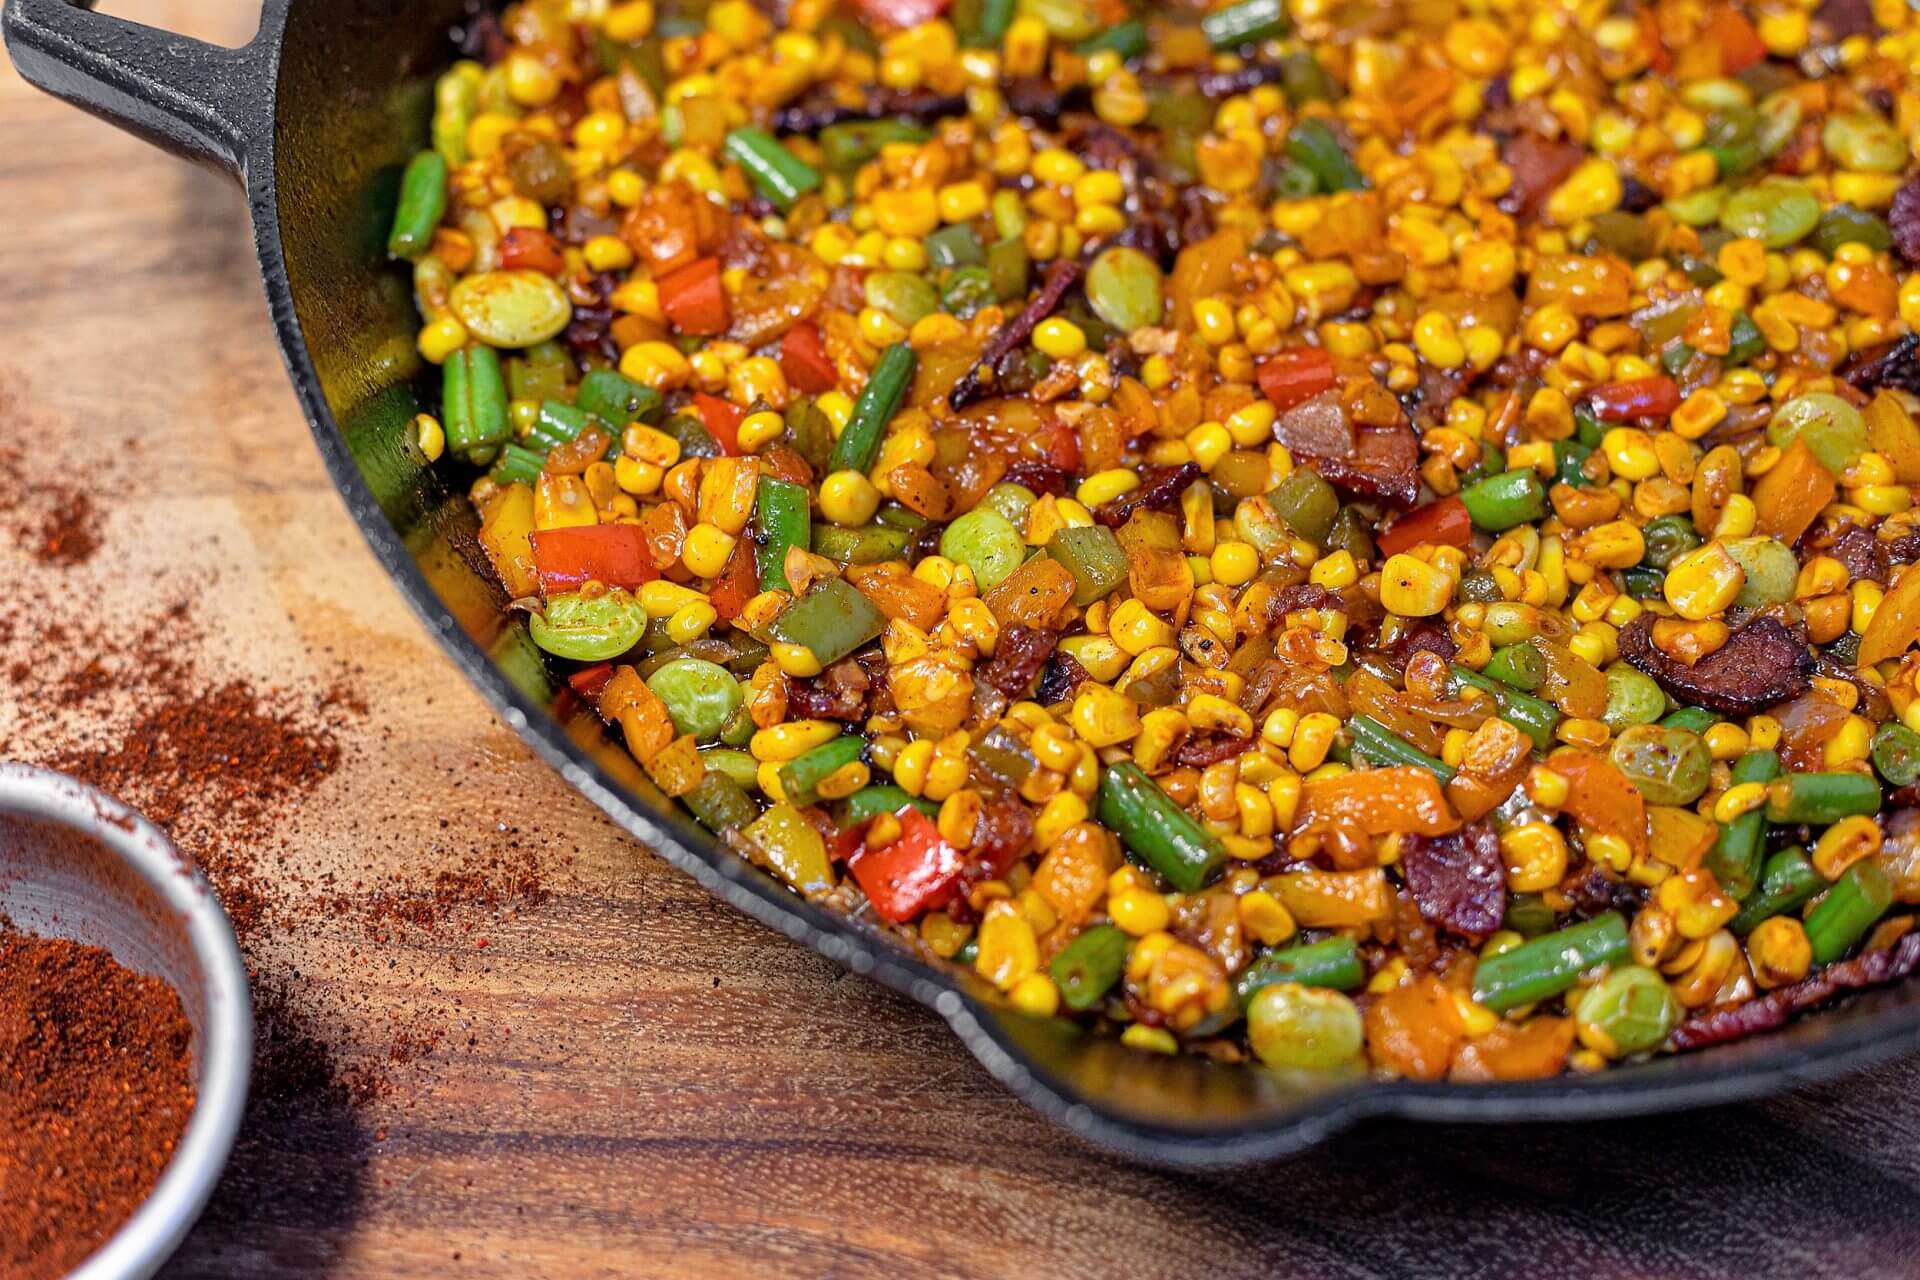 A Corn and Vegetables in a Black Color Iron Skillet